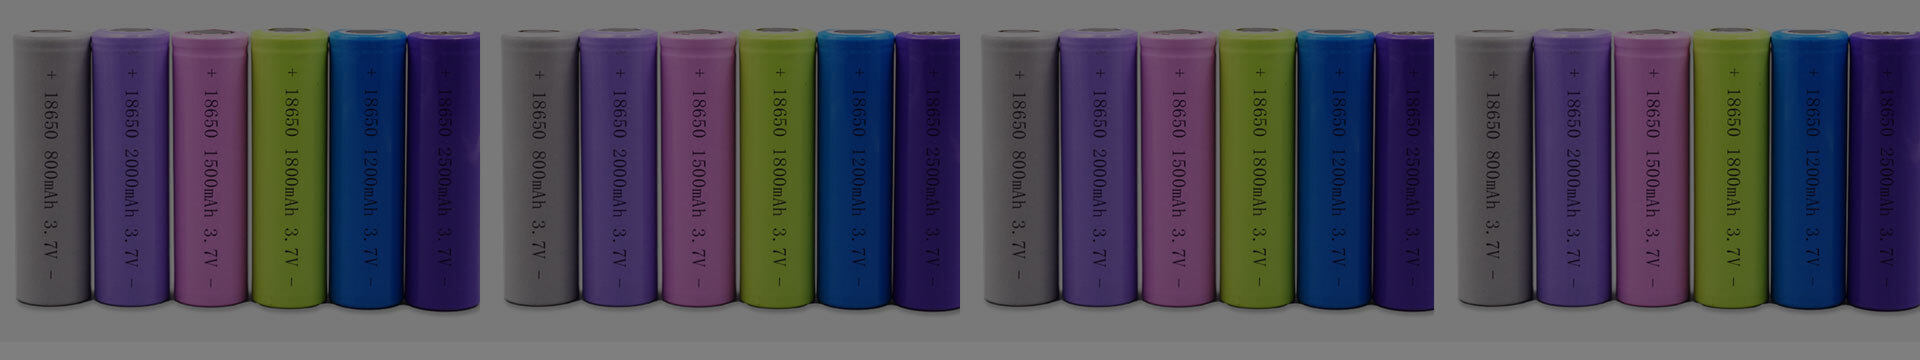 EVE C40 Battery | Cylindrical Battery Cell | 20000mAh Battery